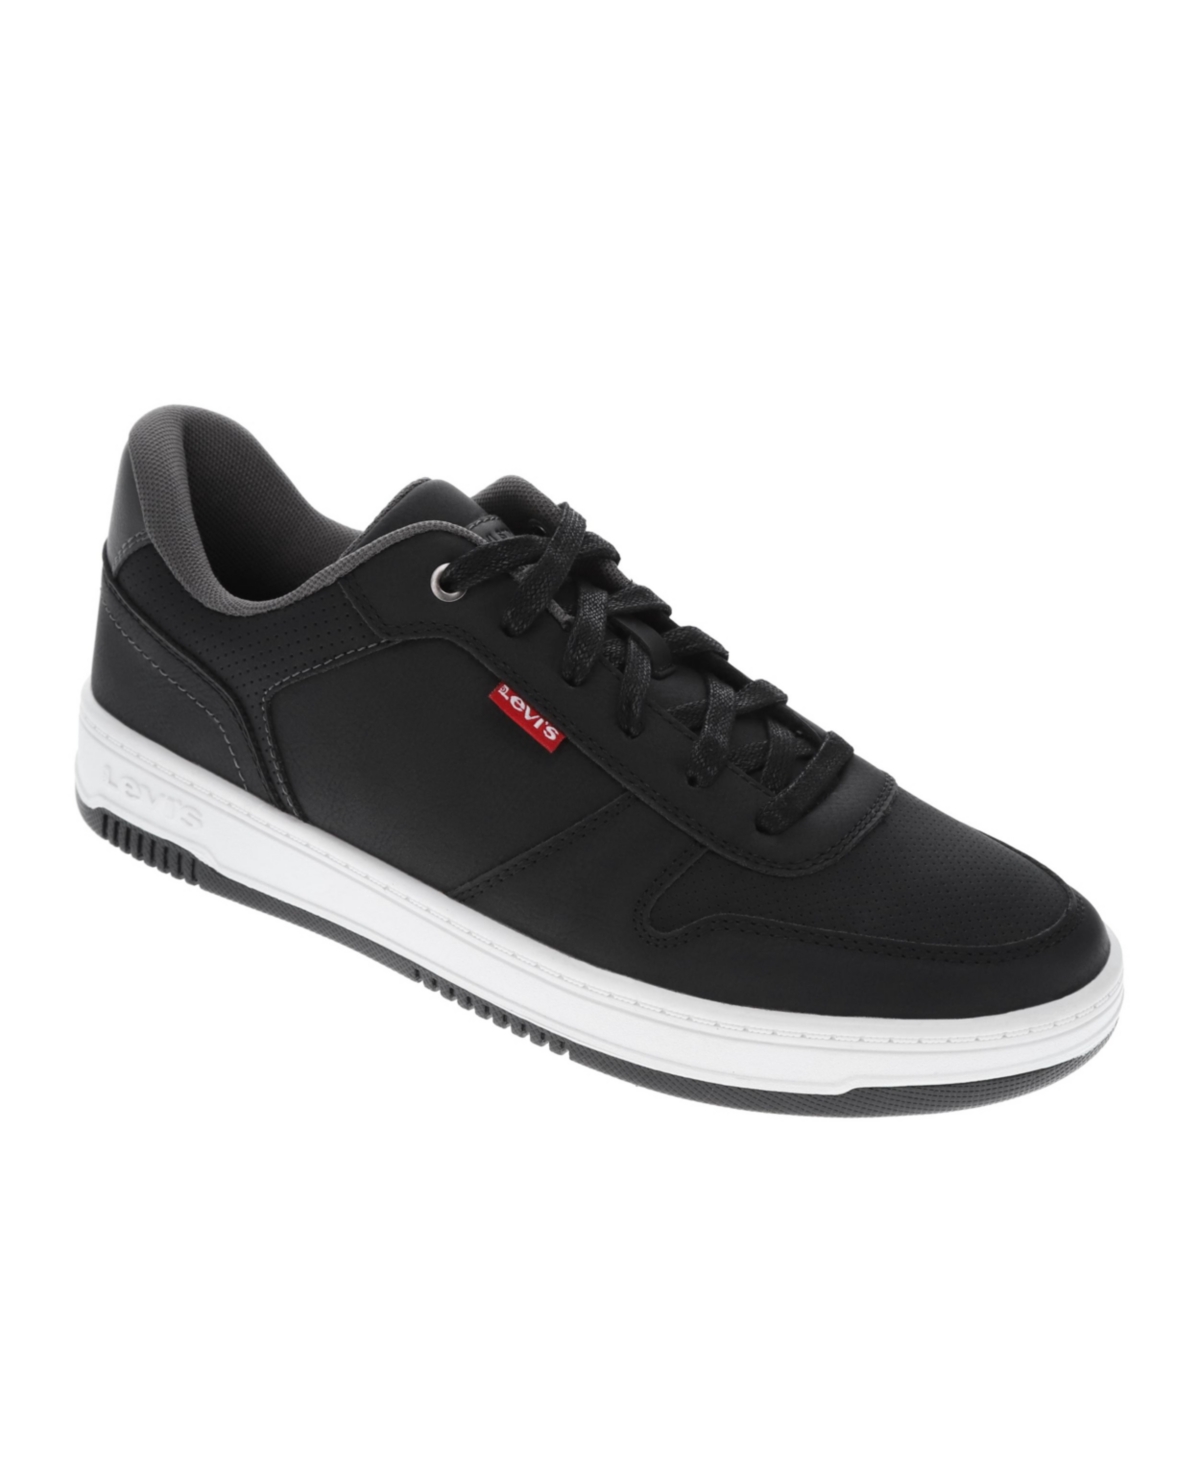 Men's Drive Low Top Cbl Fashion Athletic Lace Up Sneakers - Black, Charcoal